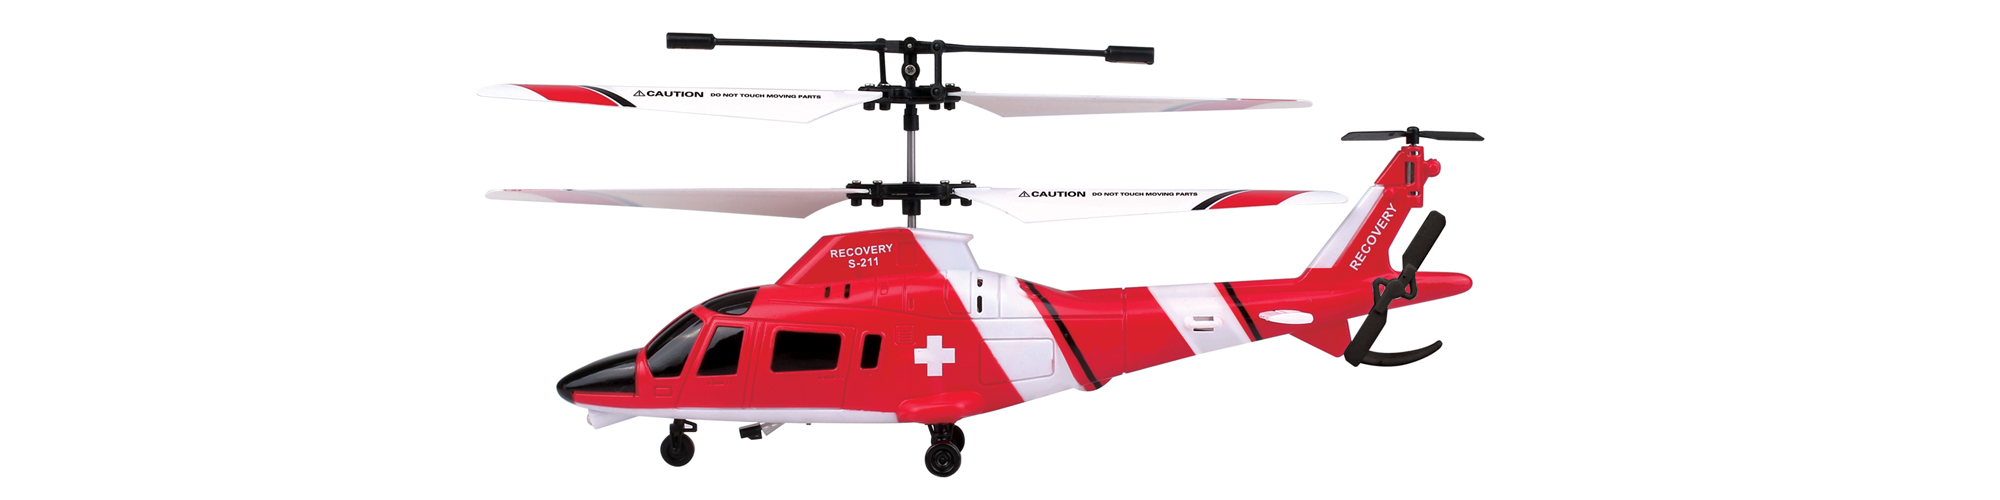 S-211 Rescue Helicopter